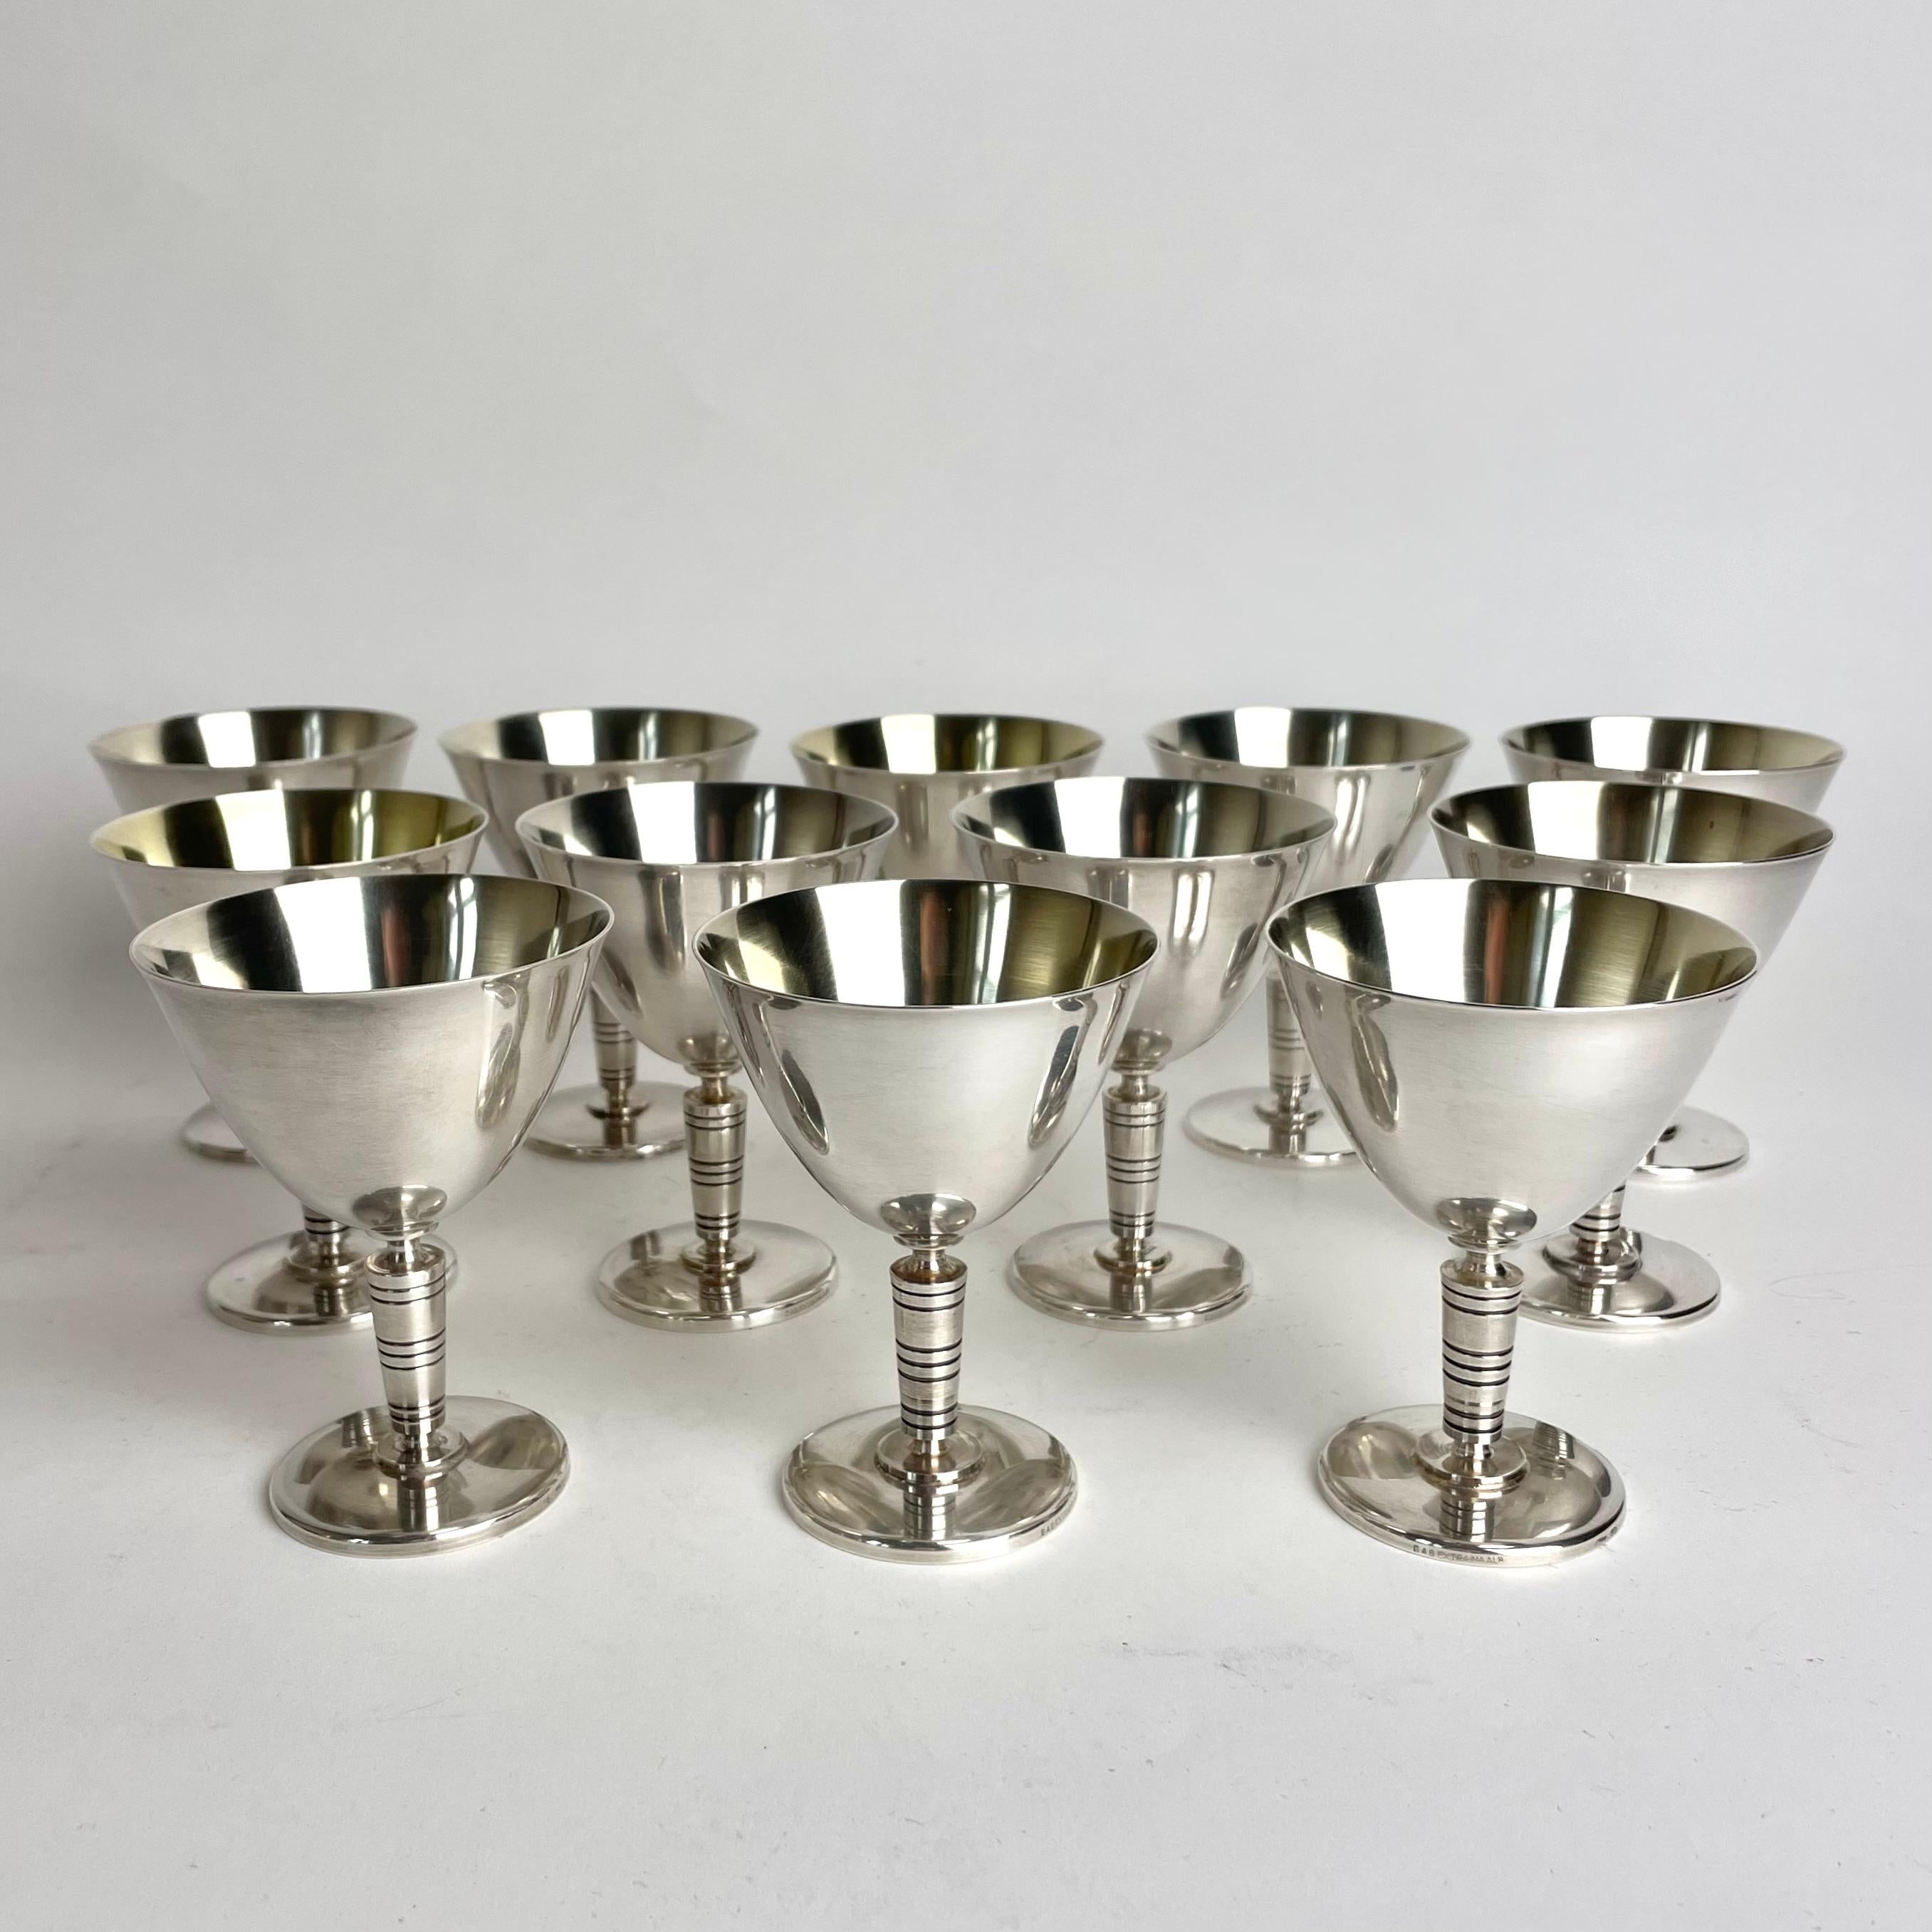 A dozen 1930s Art Deco silver plated Cocktail Glasses from GAB, Guldsmedsaktiebolaget in Sweden. Very period design. The inside of the glass bowls with some worn gilding.

Wear consistent with age and use.